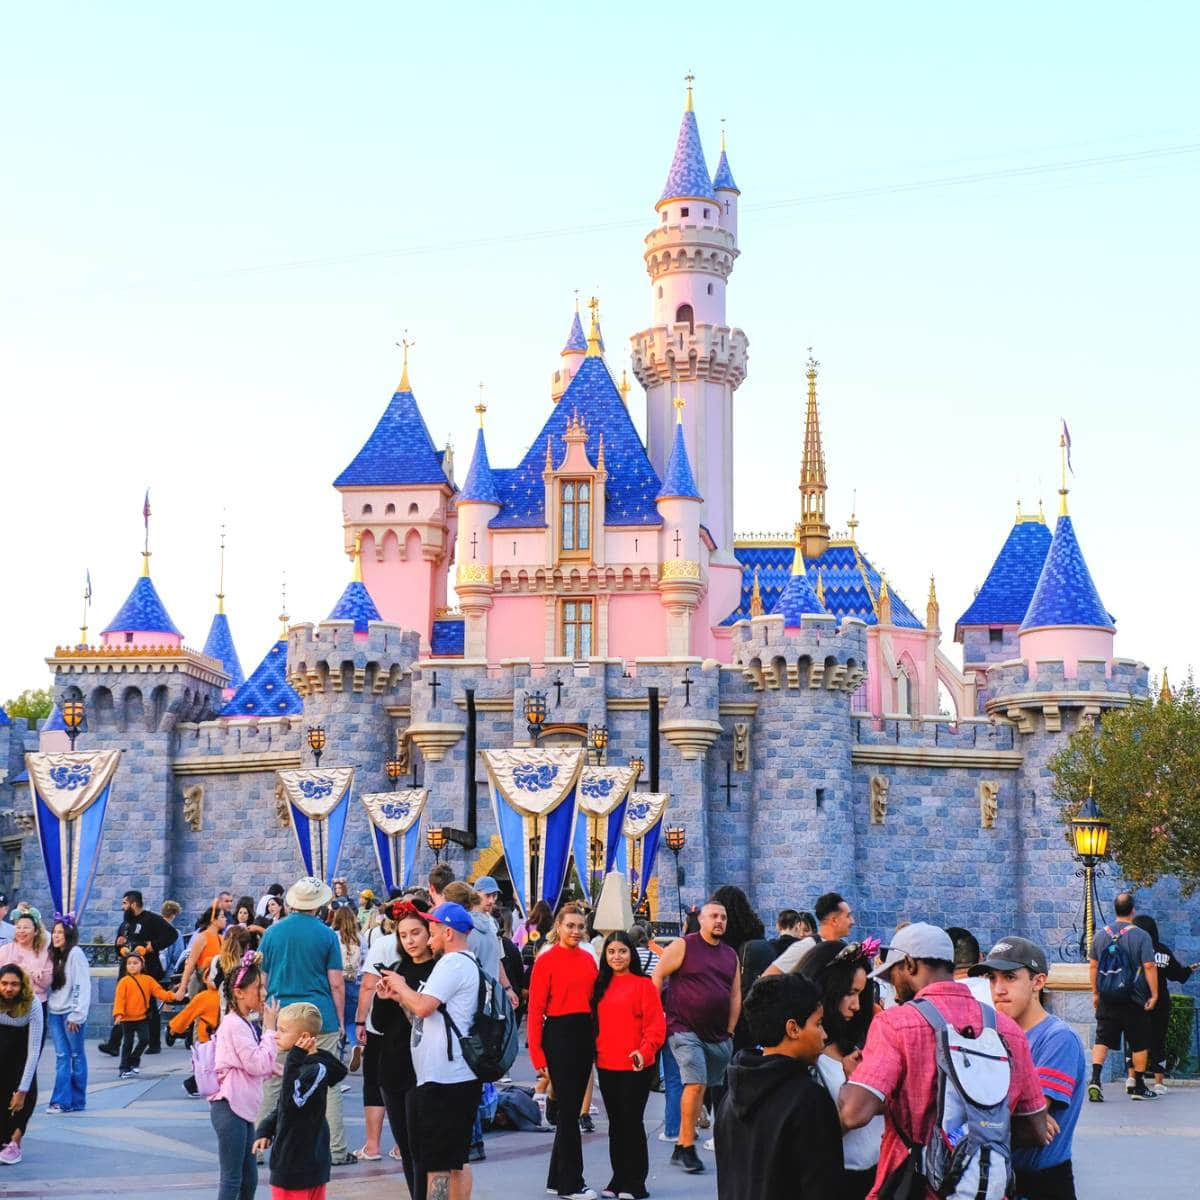 An image of the castle at Disneyland of California.